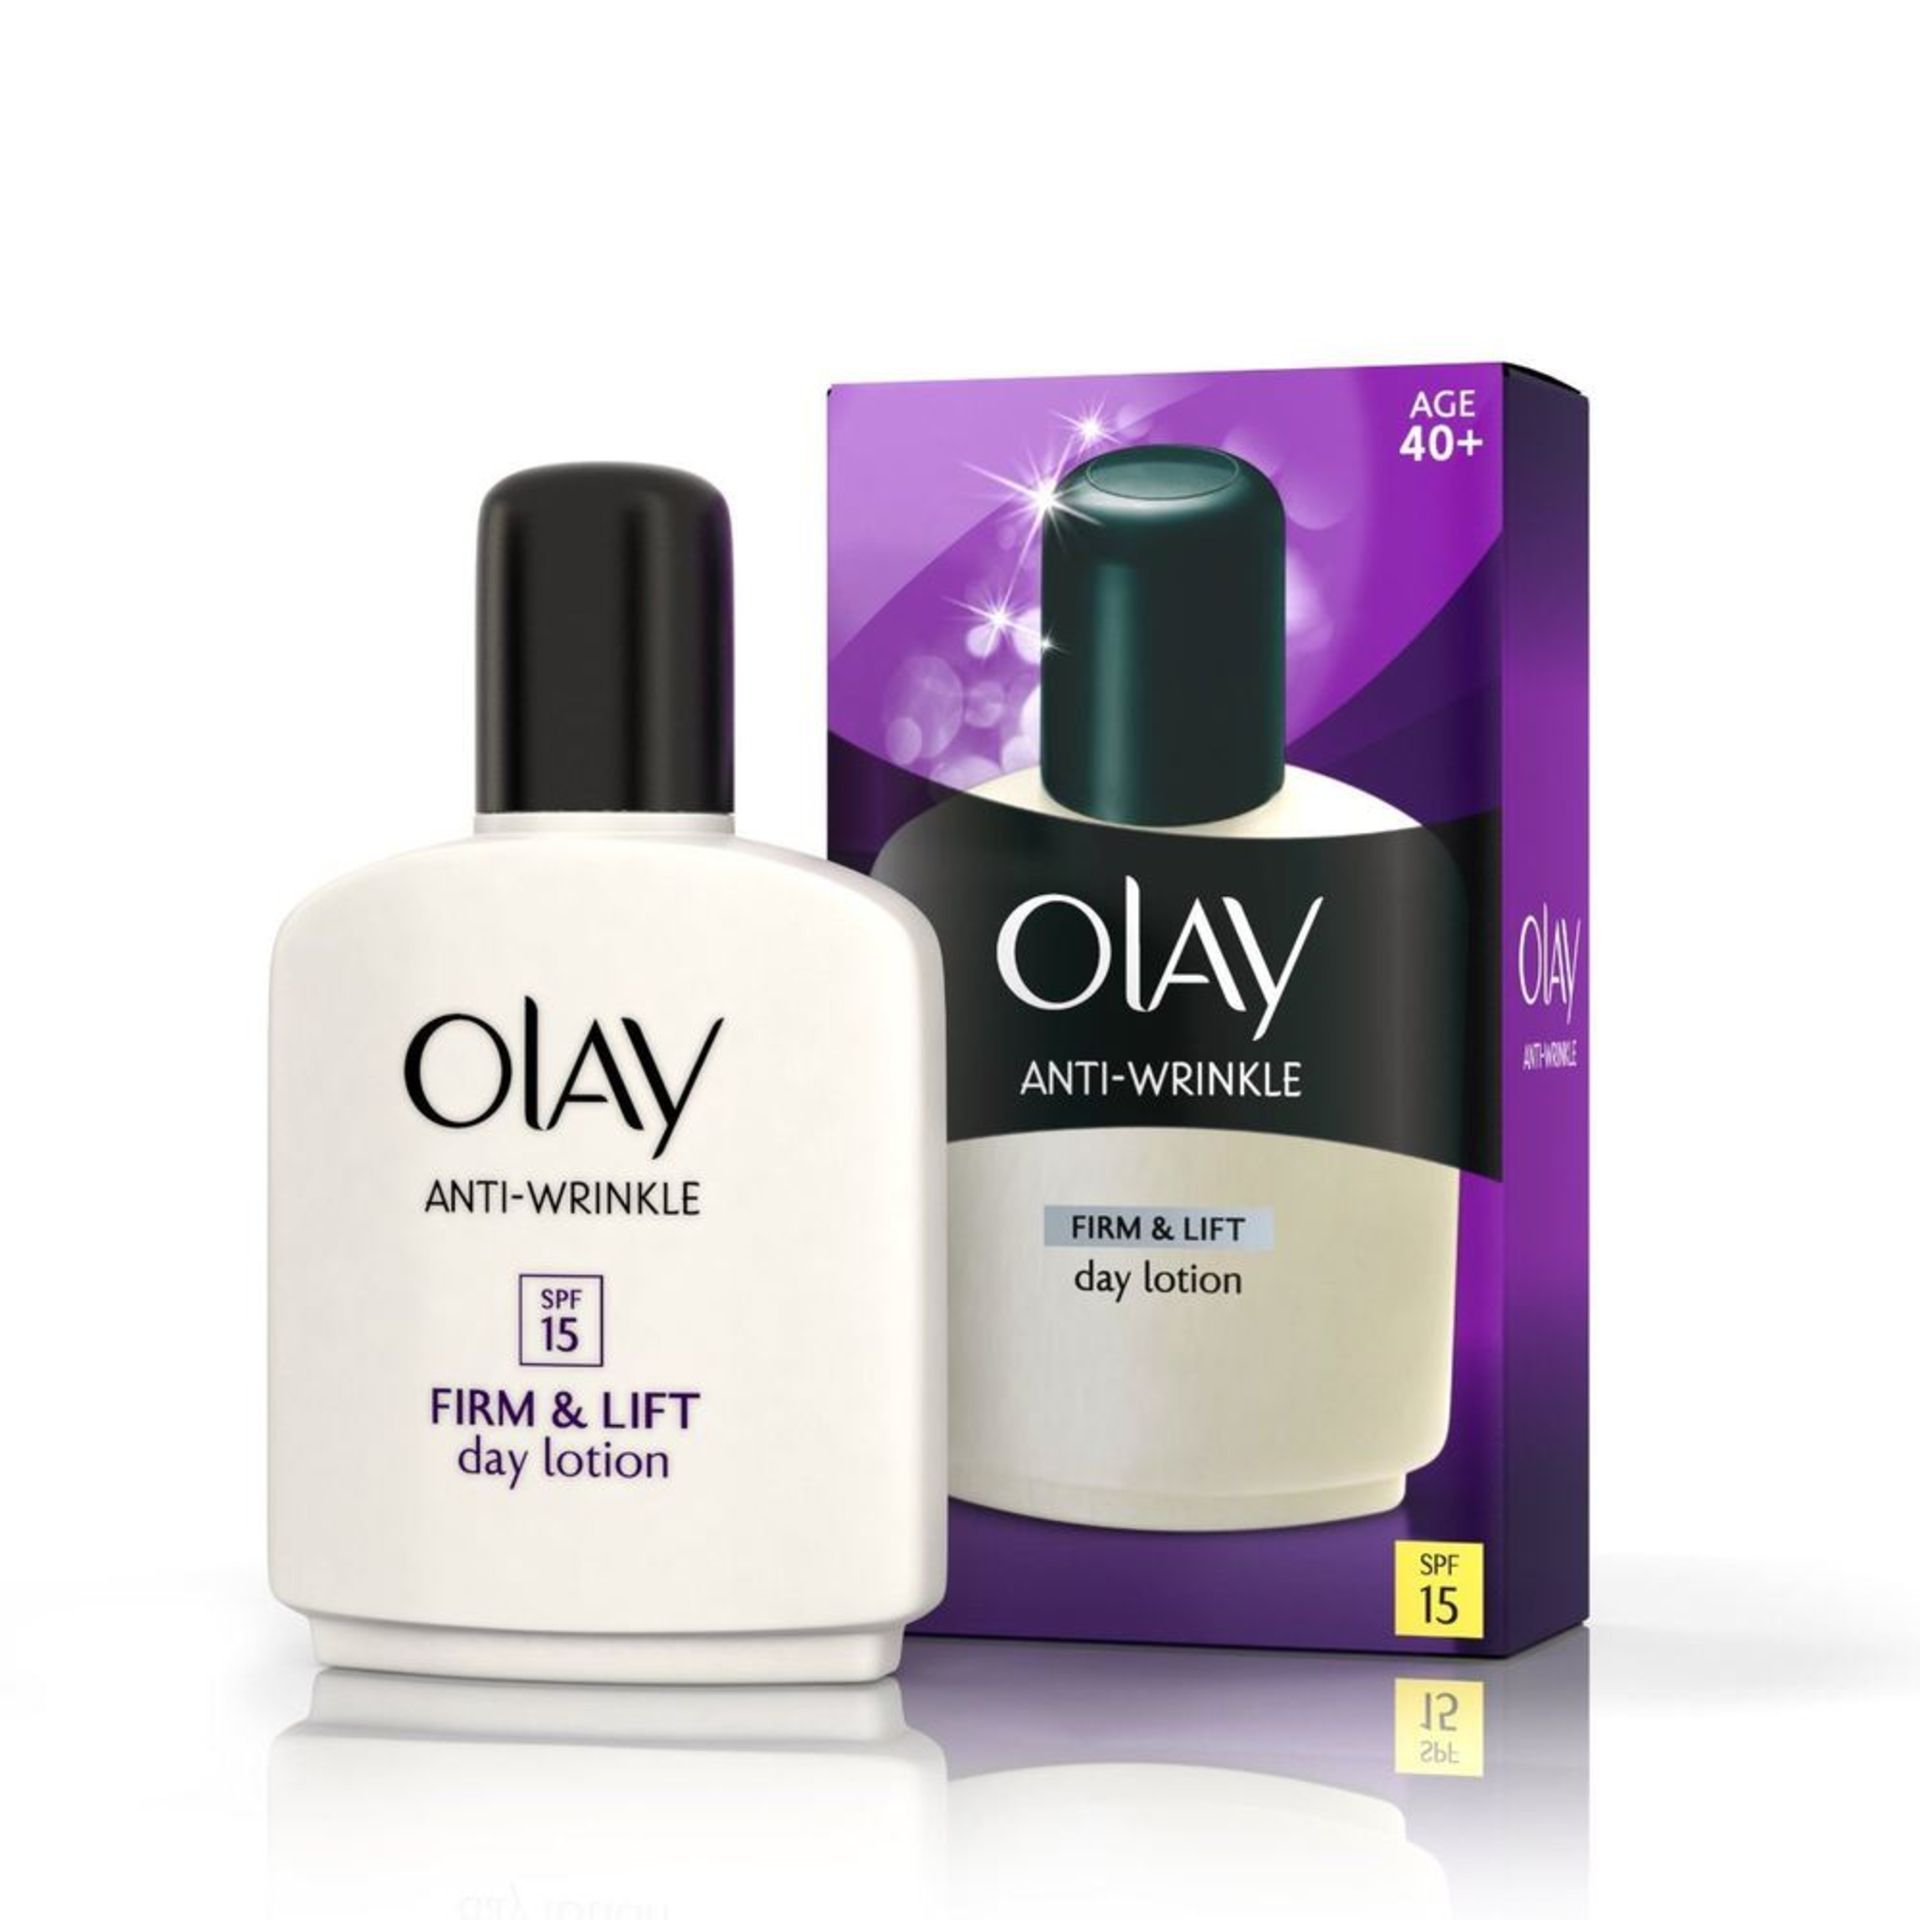 V *TRADE QTY* Brand New Olay Anti-Wrinkle Firm & Lift Day Lotion 100 ml/SPF15/40+ X120 YOUR BID